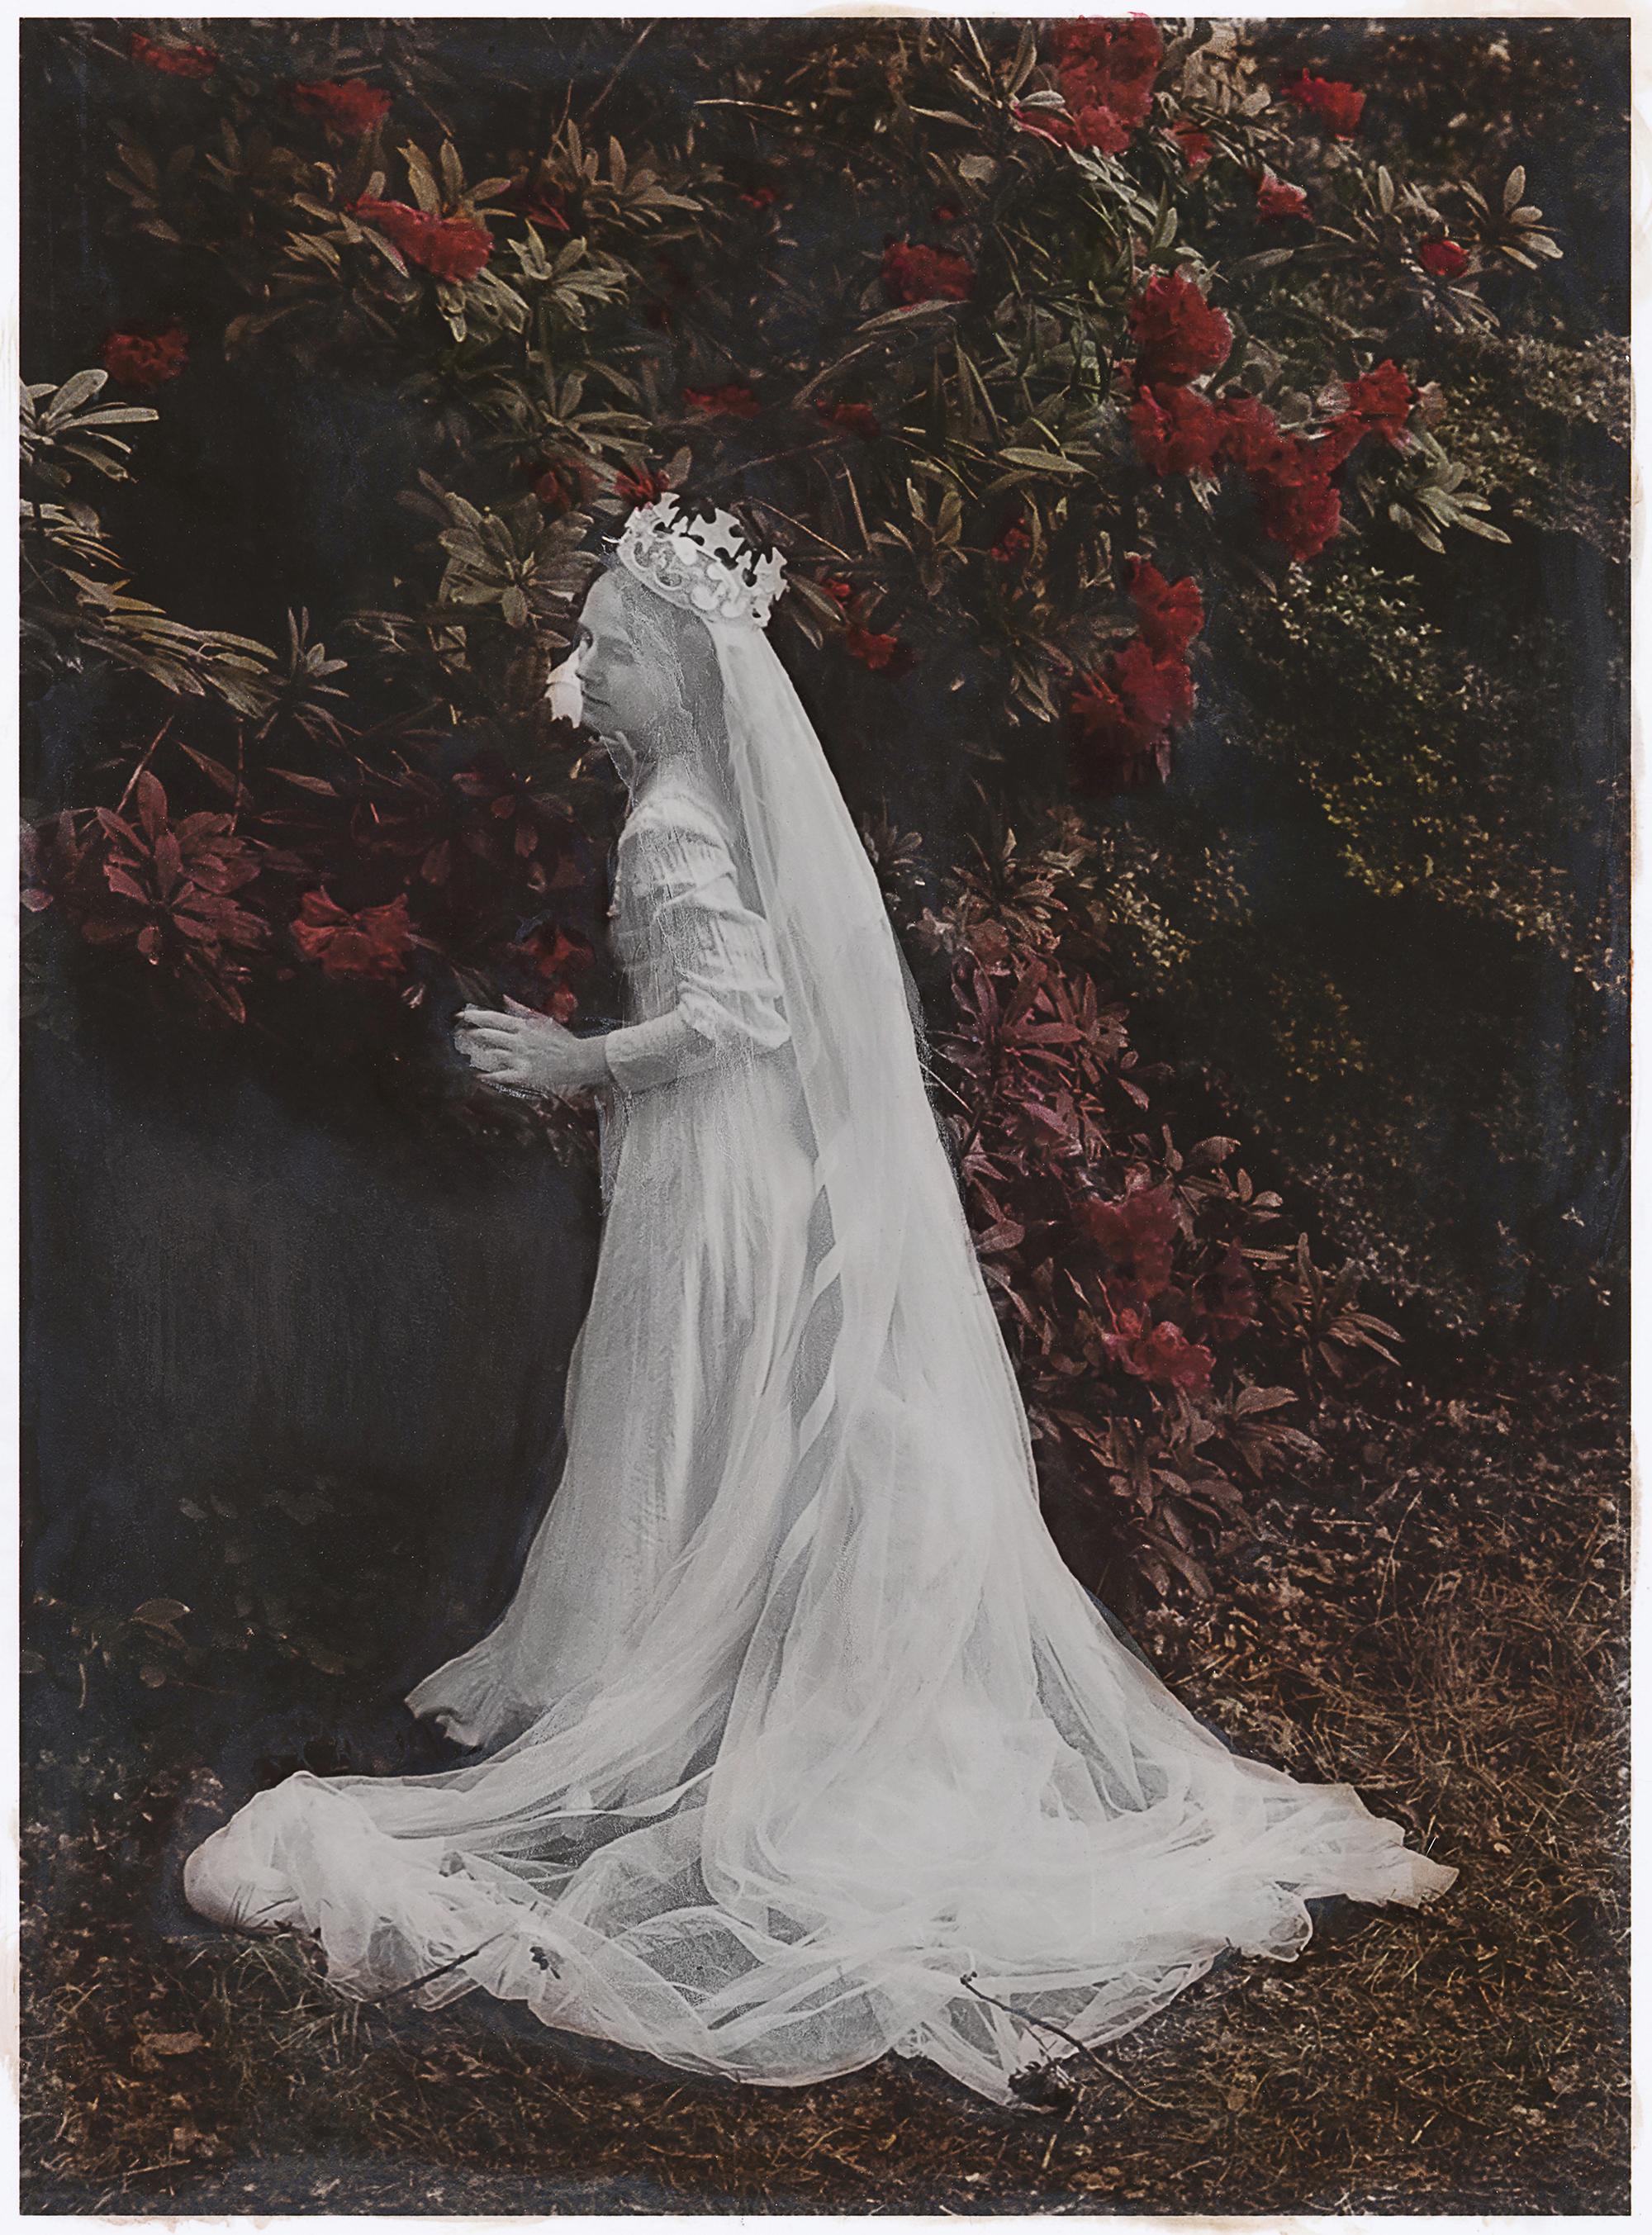 Katie Eleanor Color Photograph - Regal monarch immobilised in marble with her reigning celebrated the blooms